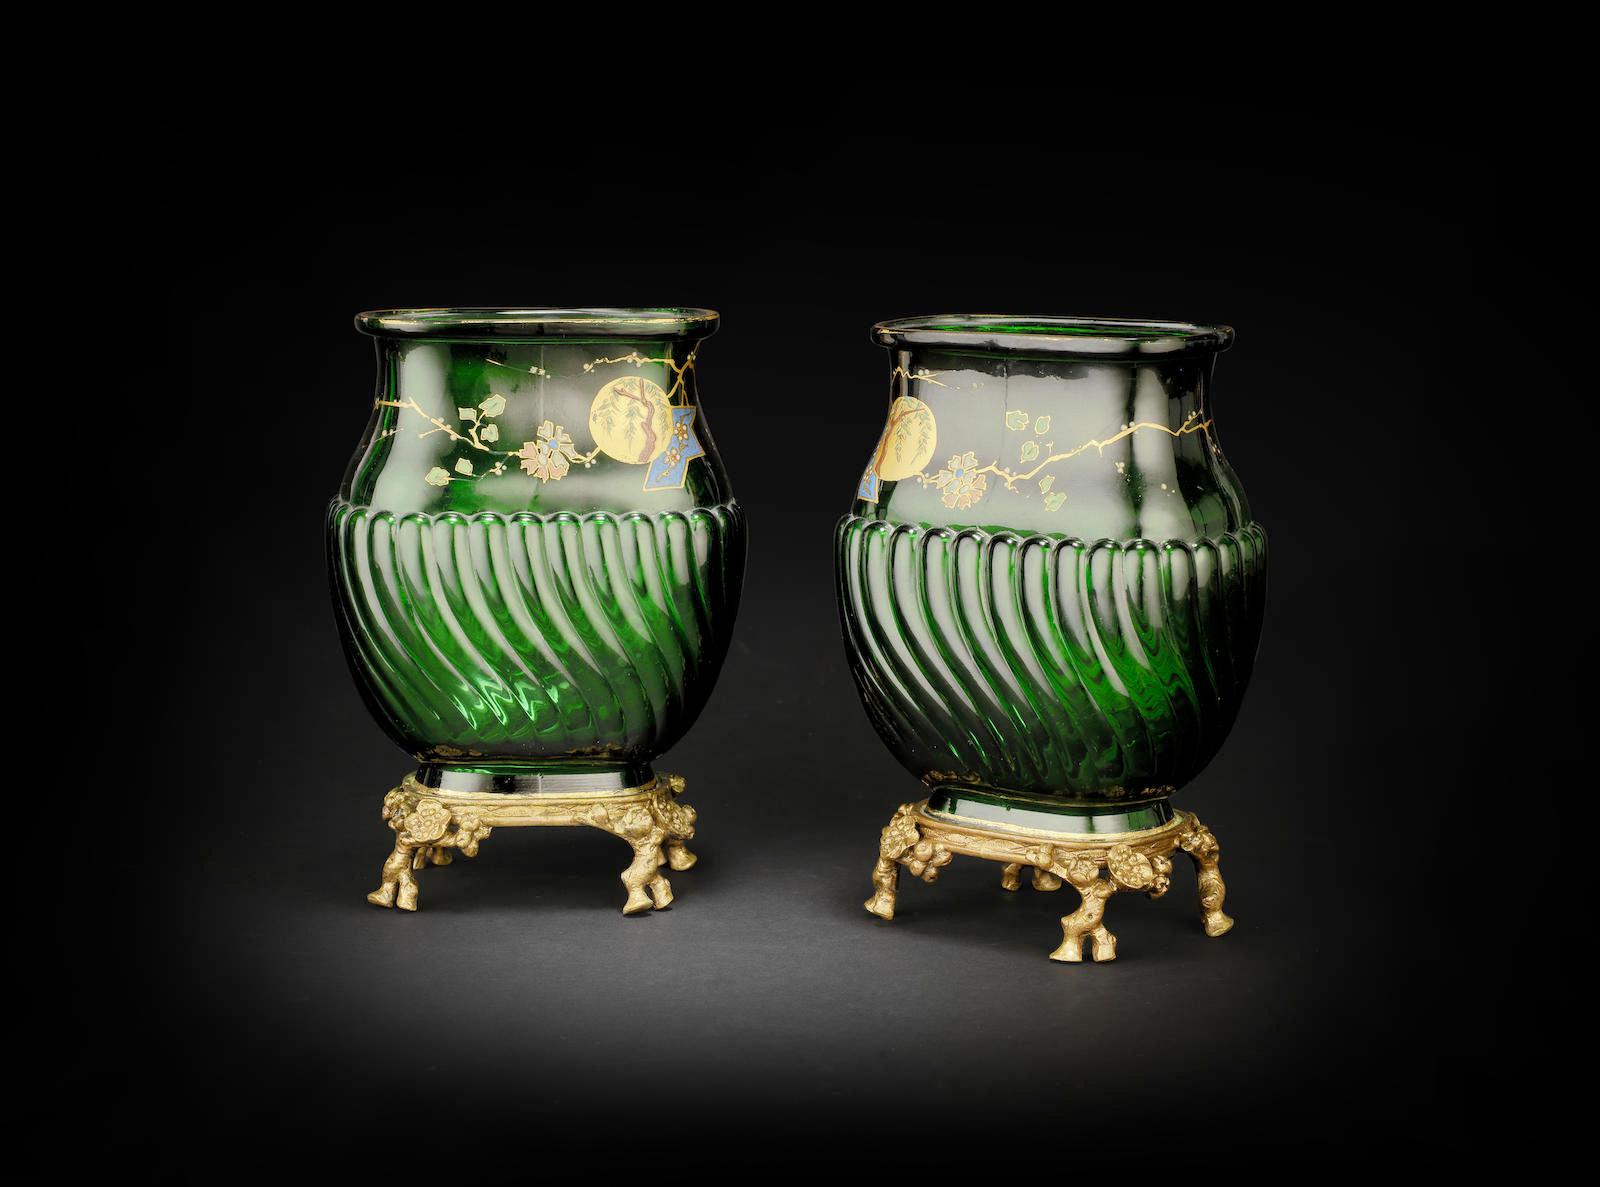 Baccarat Emerald Green Pair of Japonisme Vases with Enamel Sakura Tree and Sun  For Sale 2